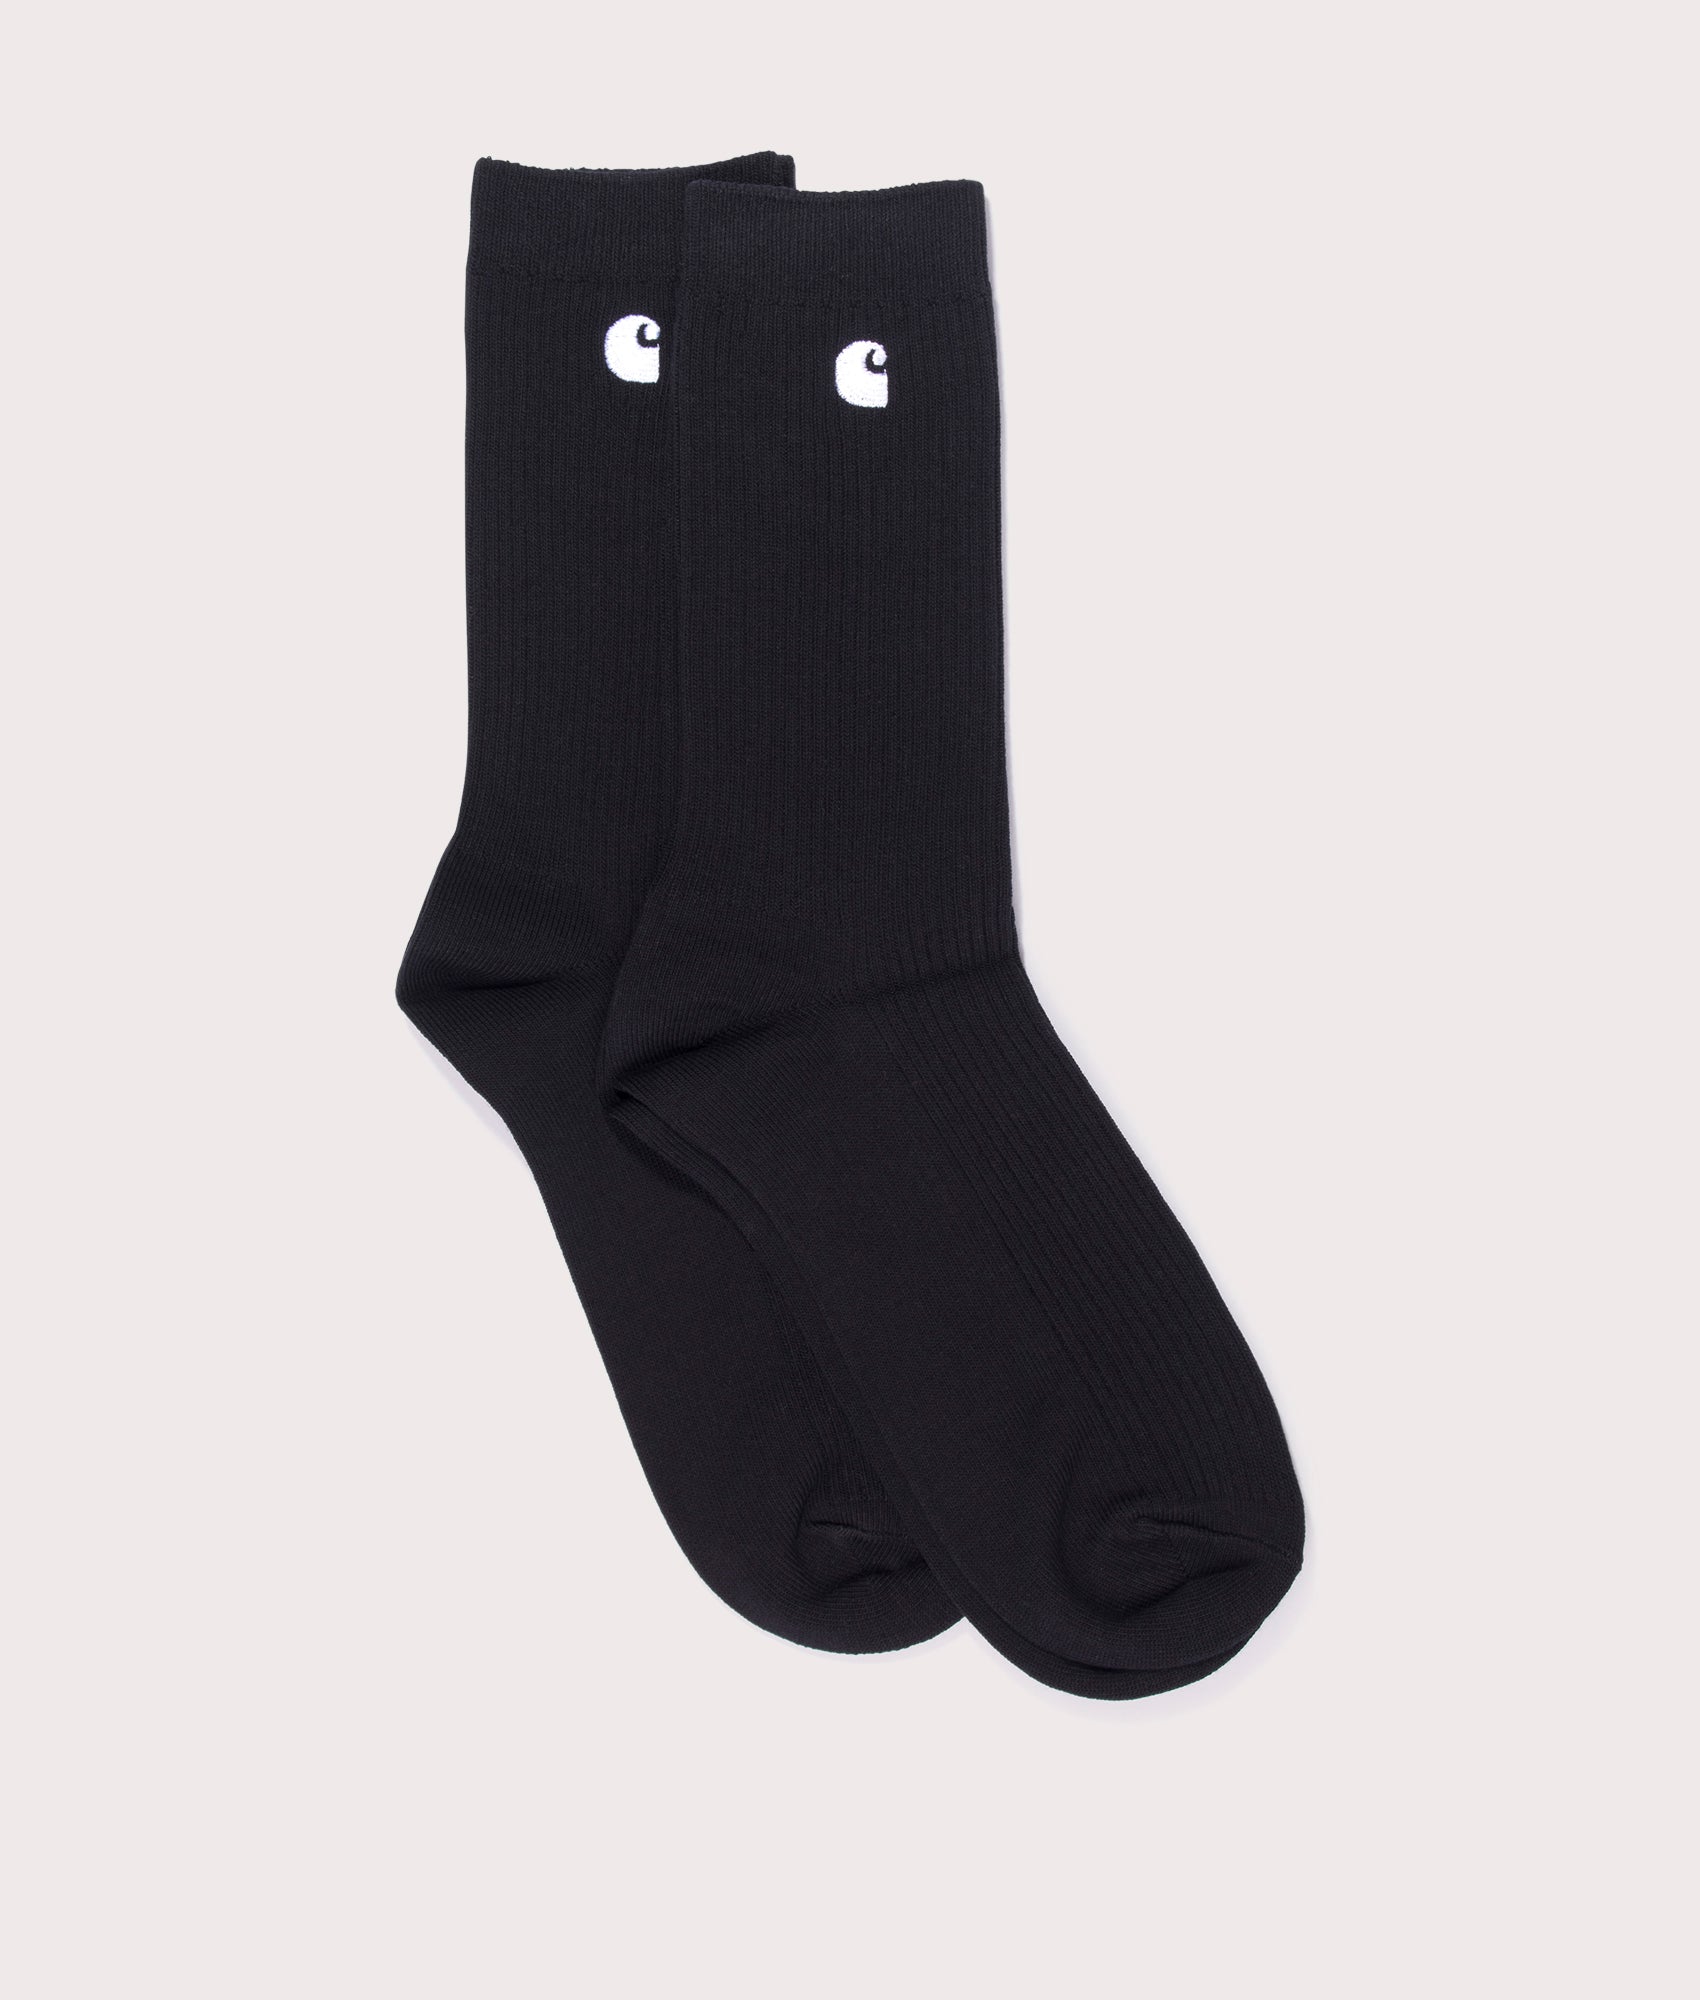 Carhartt WIP Mens Two Pack of Madison Socks - Colour: 1A5XX Black/White - Size: One Size